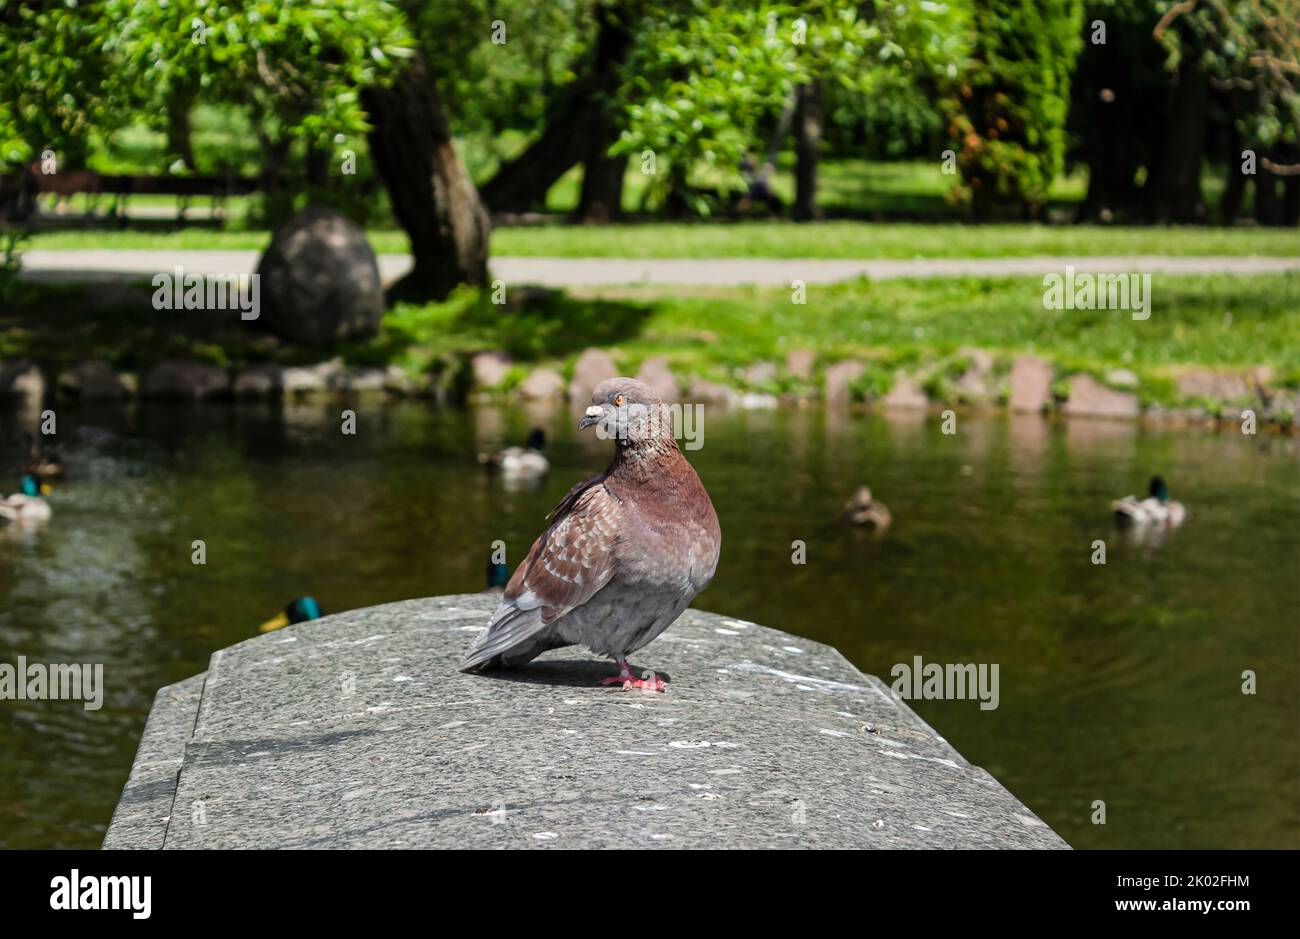 A rock dove against a backdrop of water and greenery, the common pigeon is a member of the bird family Columbidae. Stock Photo